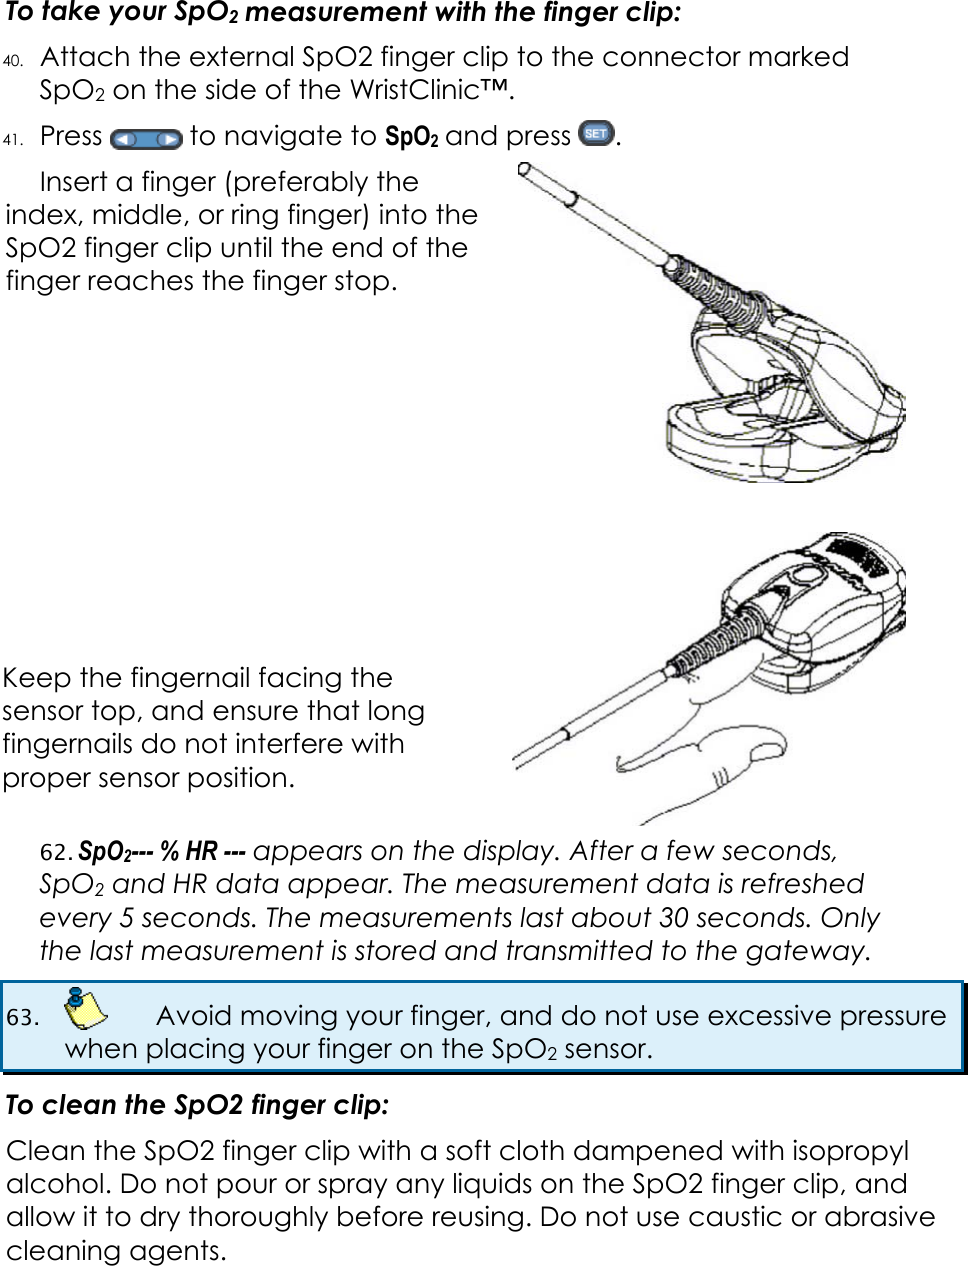  To take your SpO2 measurement with the finger clip: 40. Attach the external SpO2 finger clip to the connector marked SpO2 on the side of the WristClinic™. 41. Press   to navigate to SpO2 and press  .  Insert a finger (preferably the index, middle, or ring finger) into the SpO2 finger clip until the end of the finger reaches the finger stop.          Keep the fingernail facing the sensor top, and ensure that long fingernails do not interfere with proper sensor position.  62. SpO2--- % HR --- appears on the display. After a few seconds, SpO2 and HR data appear. The measurement data is refreshed every 5 seconds. The measurements last about 30 seconds. Only the last measurement is stored and transmitted to the gateway. 63.    Avoid moving your finger, and do not use excessive pressure when placing your finger on the SpO2 sensor. To clean the SpO2 finger clip: Clean the SpO2 finger clip with a soft cloth dampened with isopropyl alcohol. Do not pour or spray any liquids on the SpO2 finger clip, and allow it to dry thoroughly before reusing. Do not use caustic or abrasive cleaning agents.  